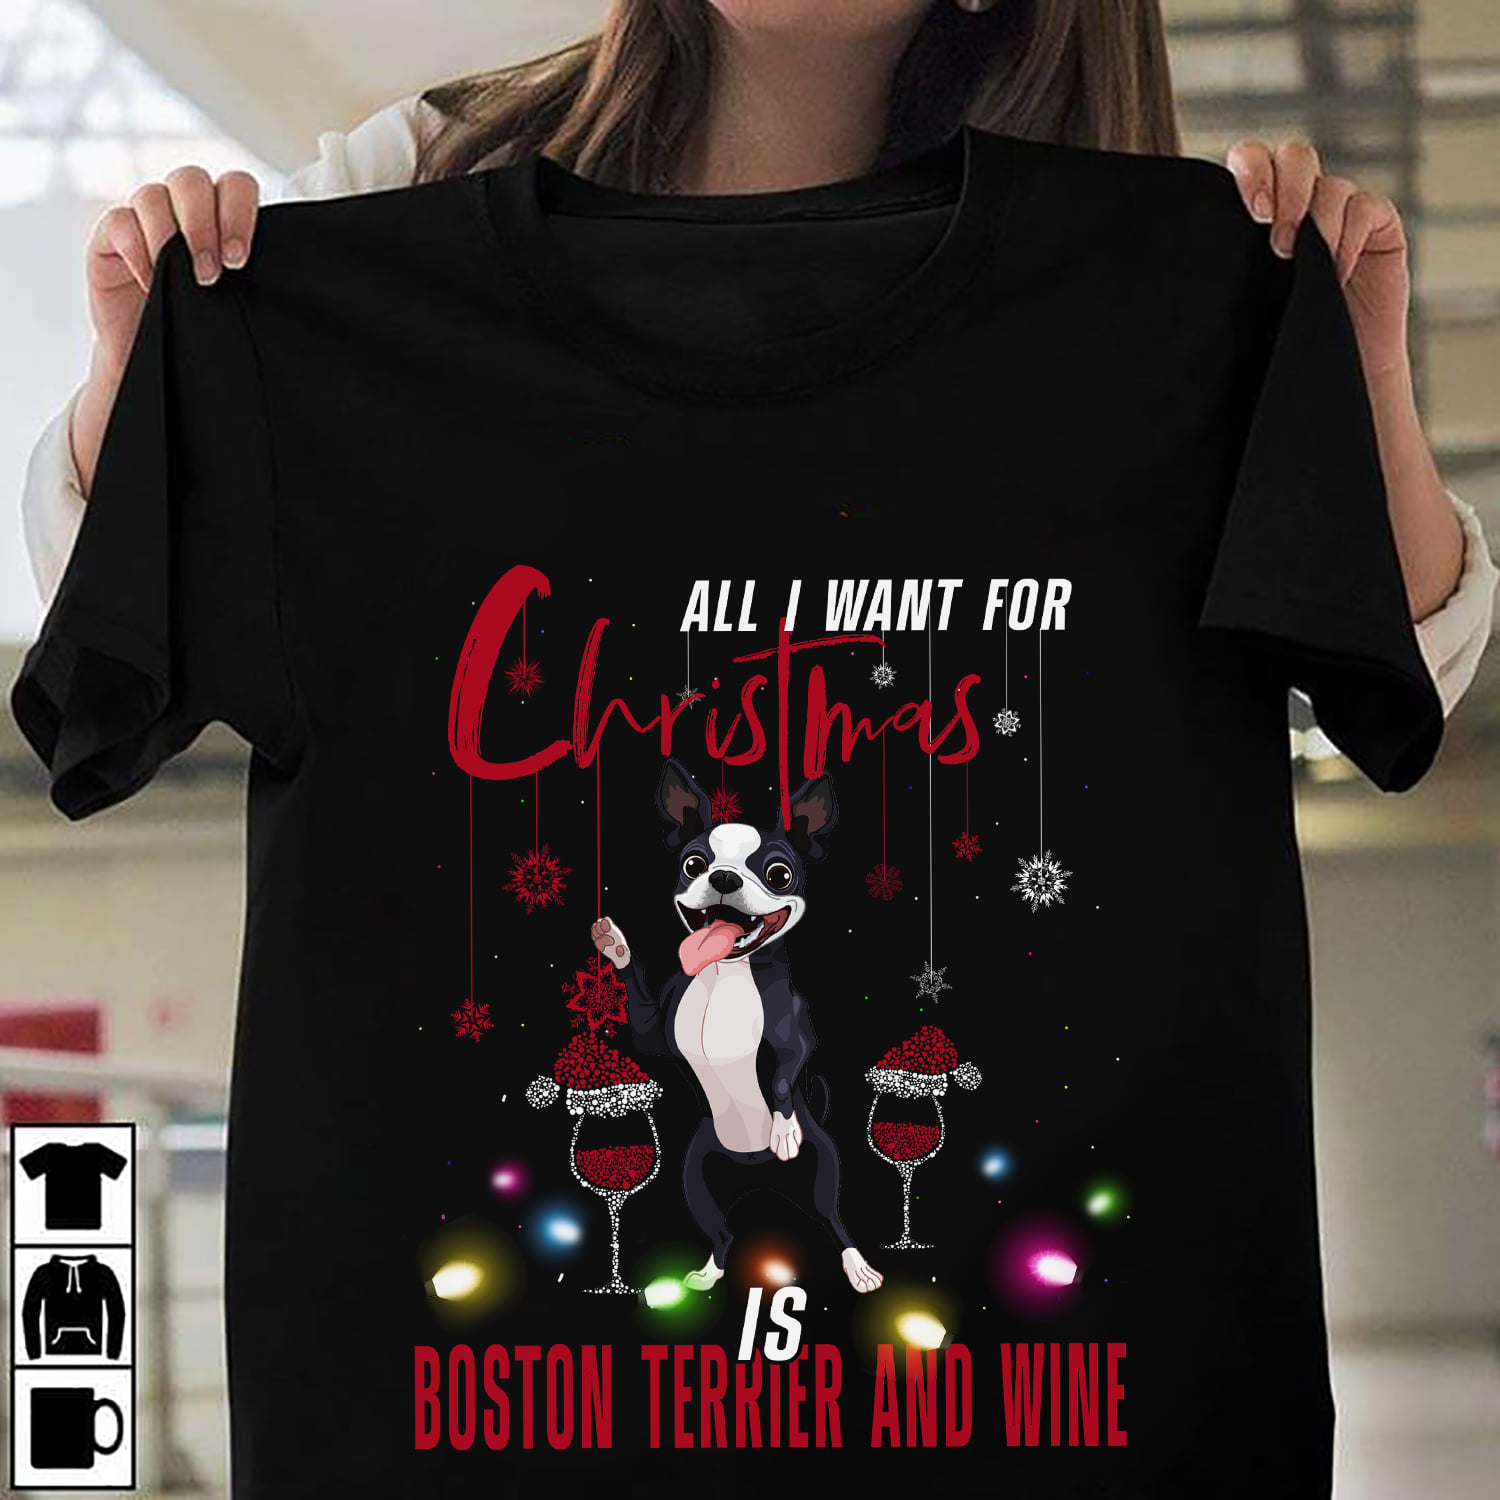 All I want for Christmas is Boston Terrier and wine - Wine for Christmas, Christmas day ugly sweater